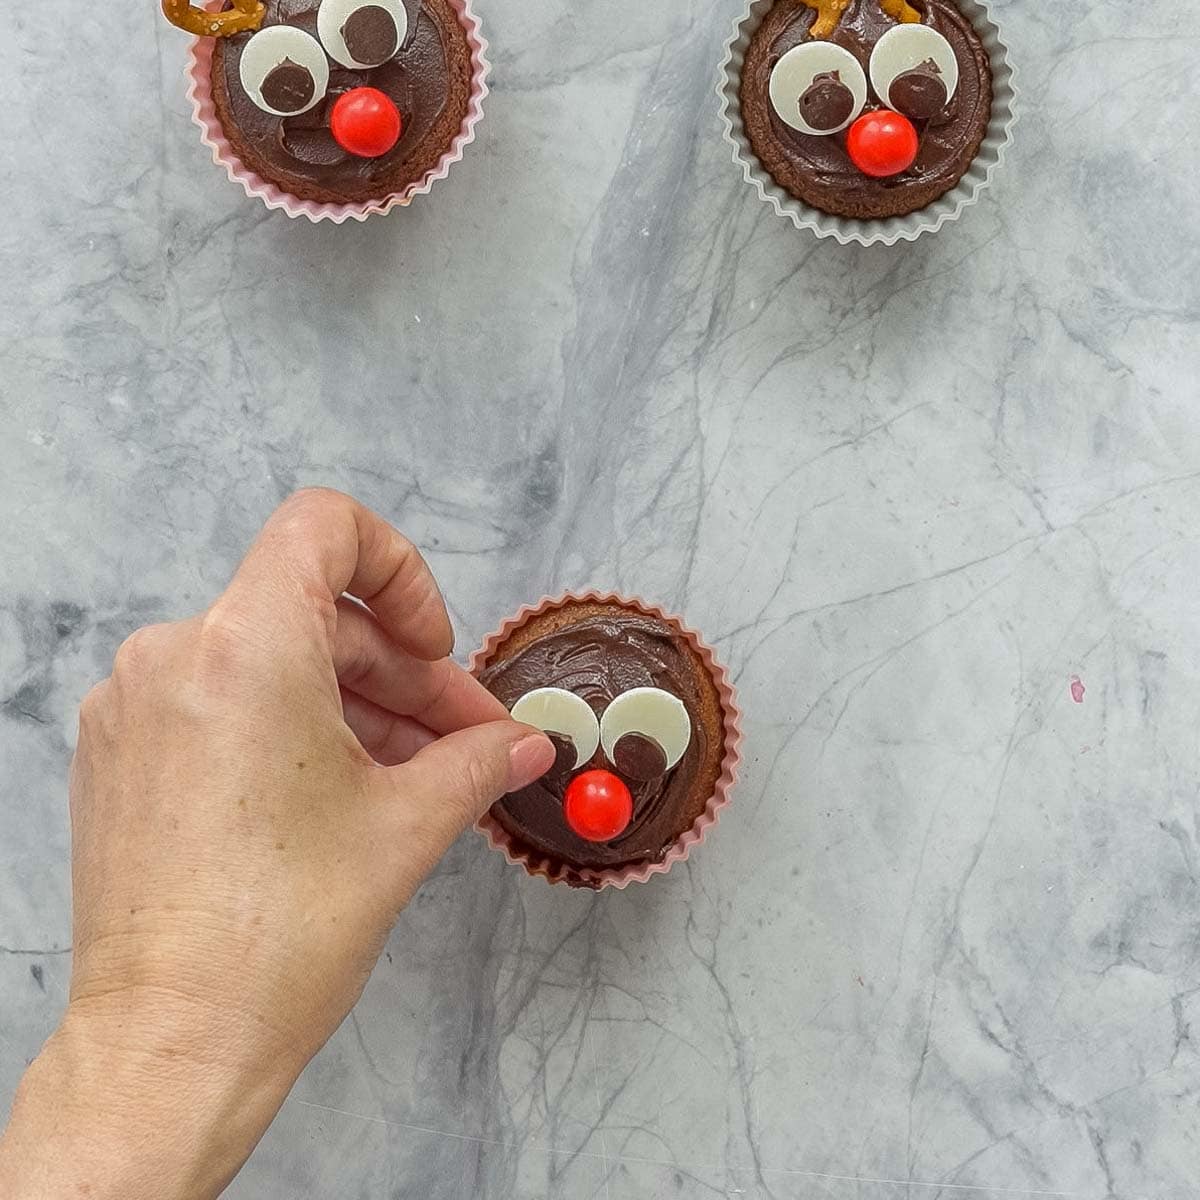 A chocolate frosted cupcake decorated with candy and chocolate buttons to look like eyes and nose. 